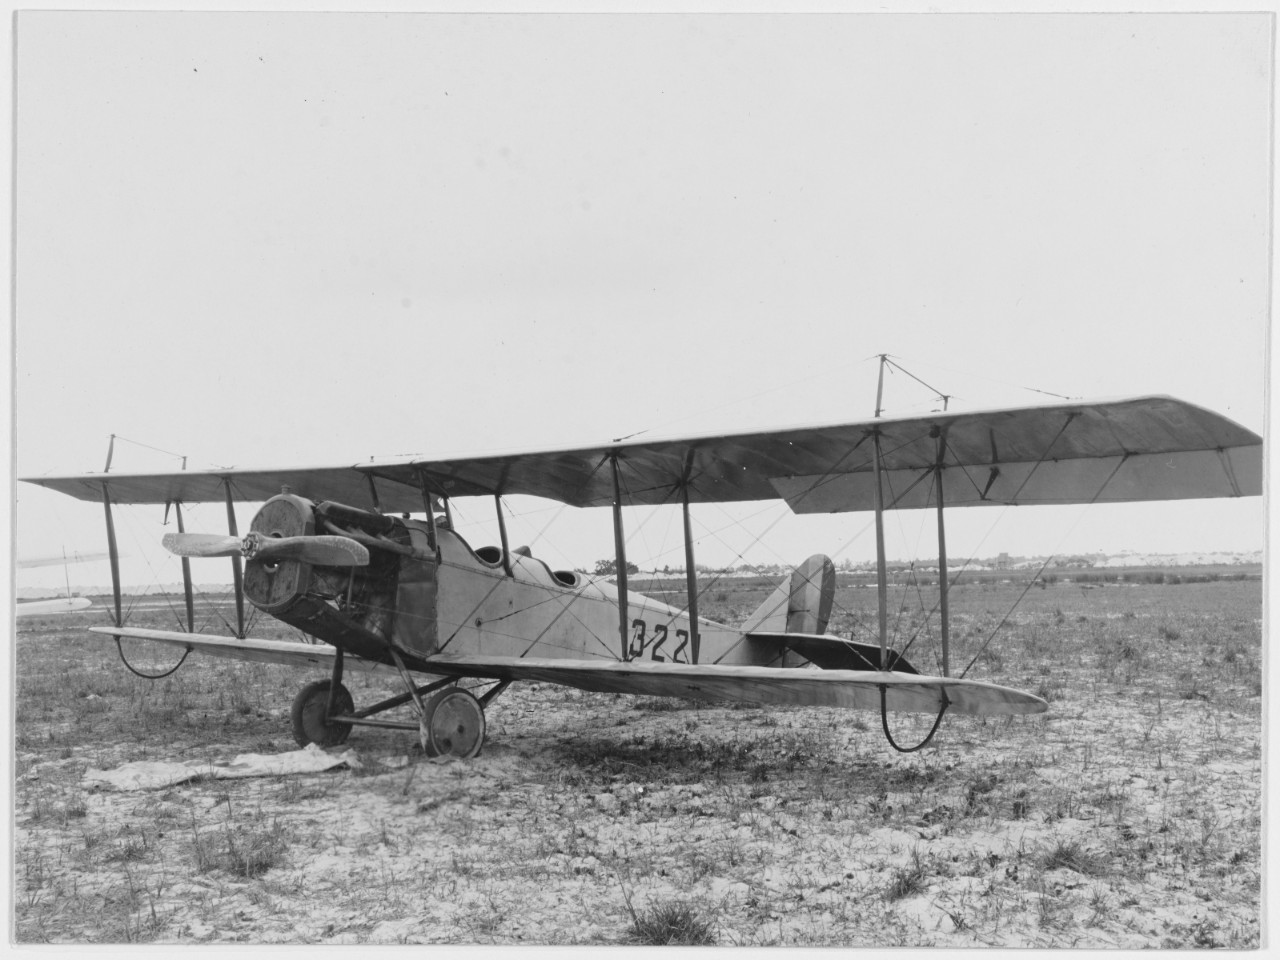 Curtiss JN-4H airplane (Bu. no. 3221), view of left side